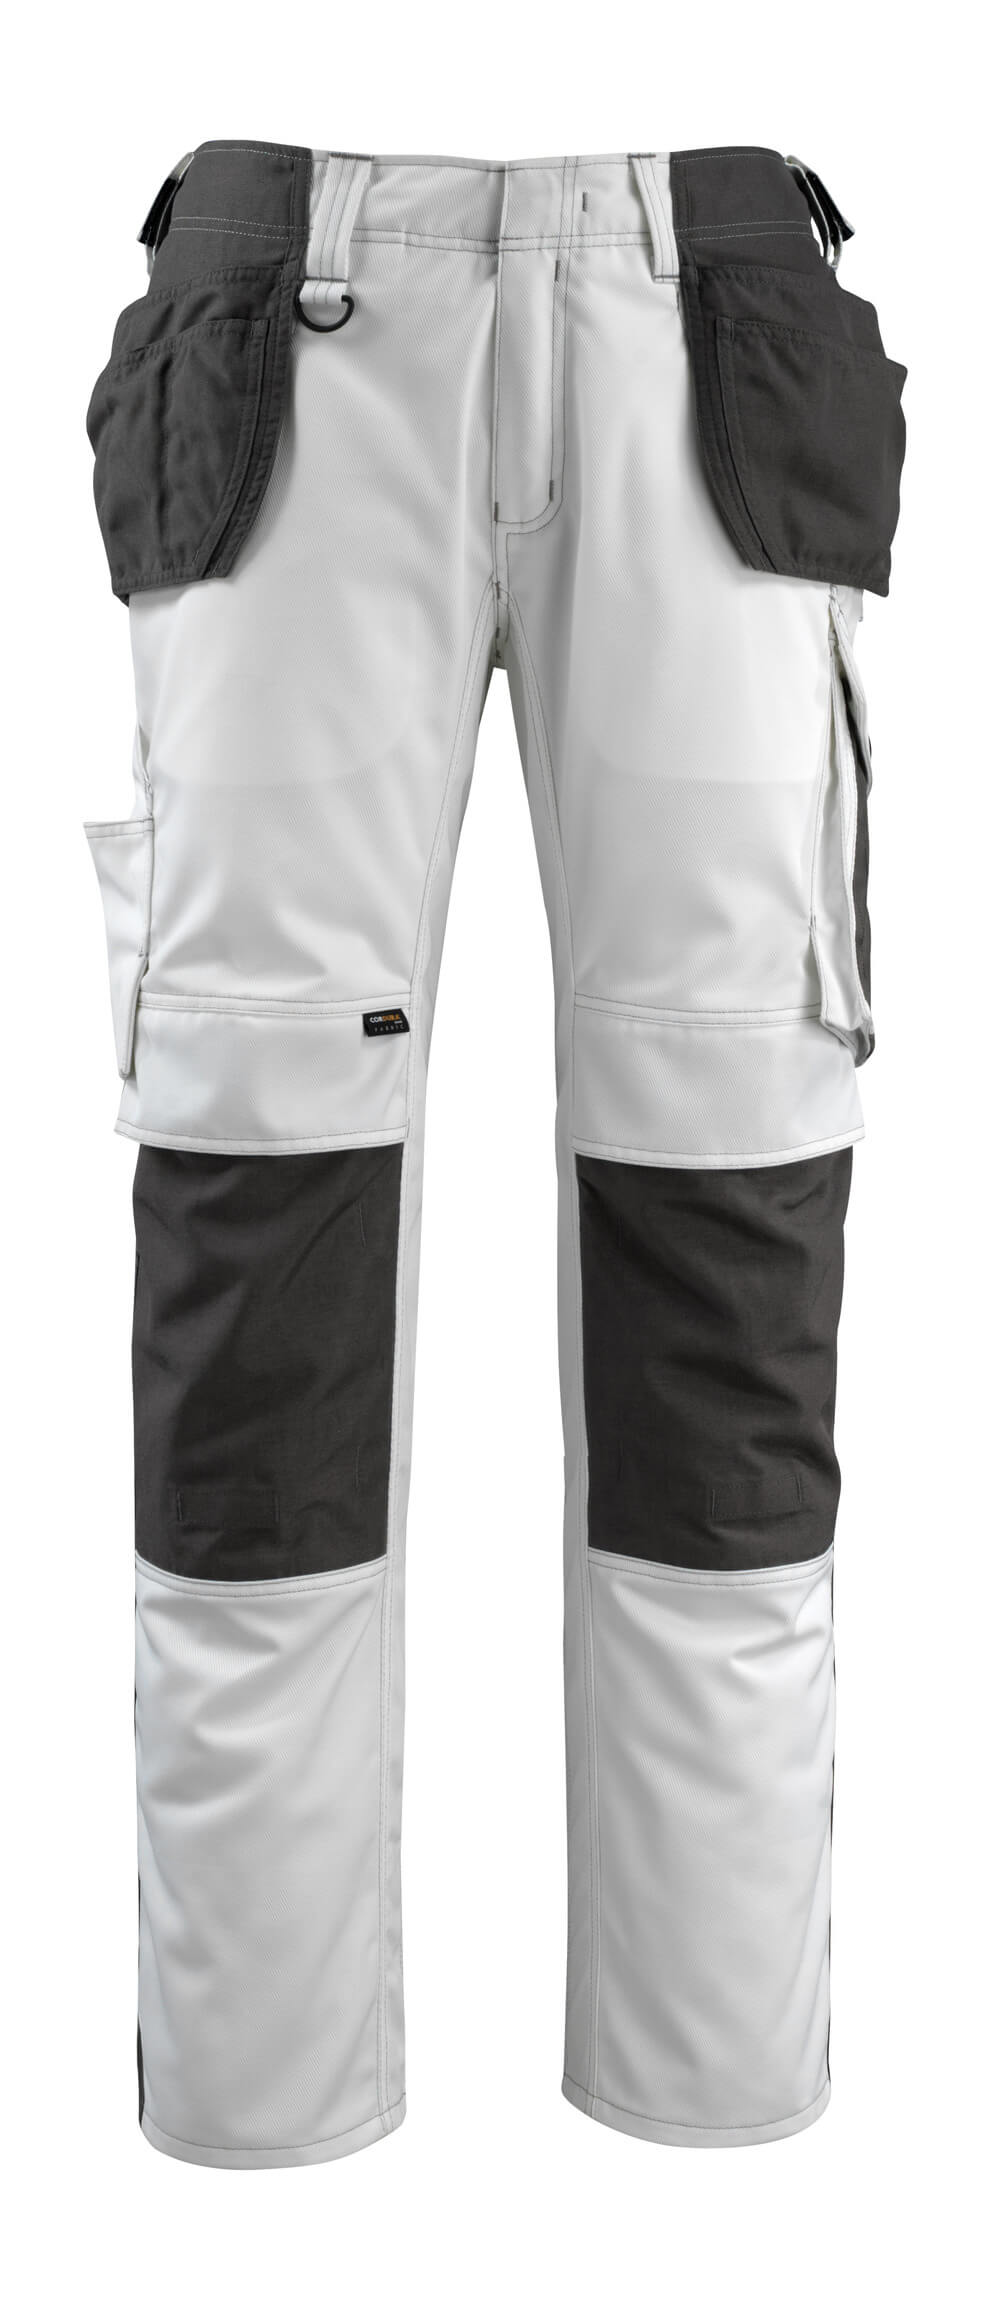 MASCOT UNIQUE Trousers with kneepad pockets and holster pockets  14031